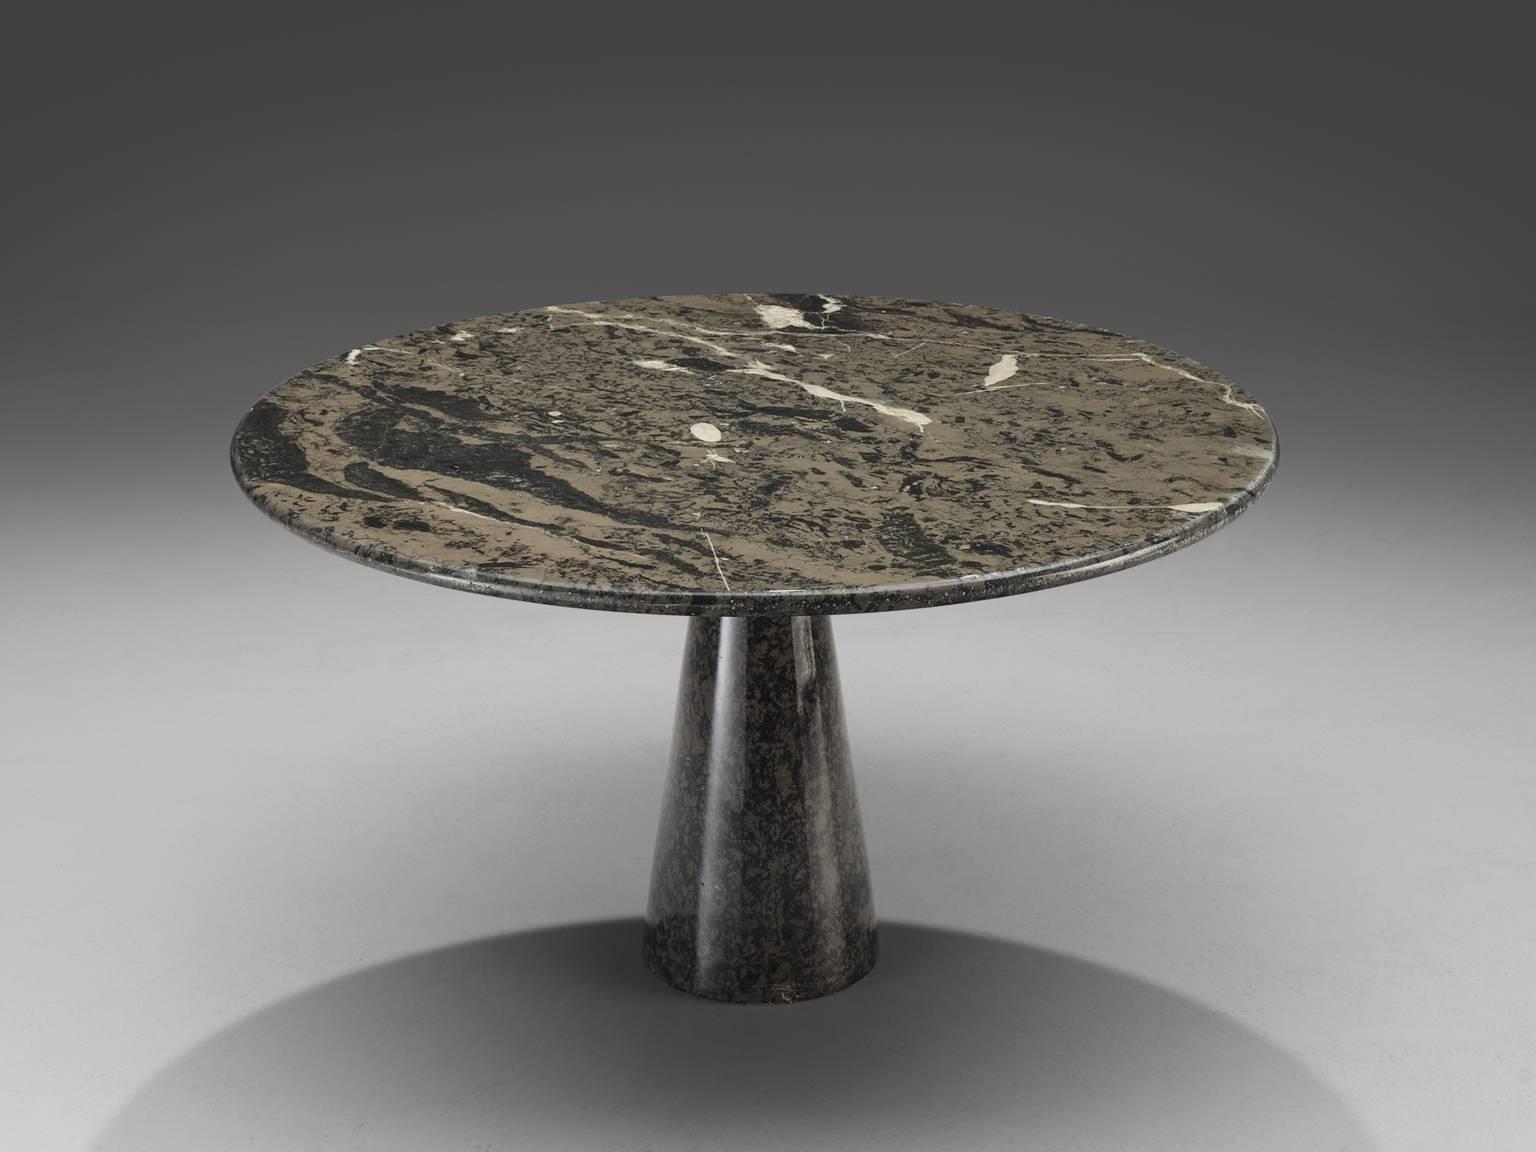 Table, marble, Italy, 1970s

This patterned deep grey to black table is designed in postwar, Italy. The circular top rests perfectly on the cone. The design showcases a play of balance and rhythm. The design is architectural in the sense that the